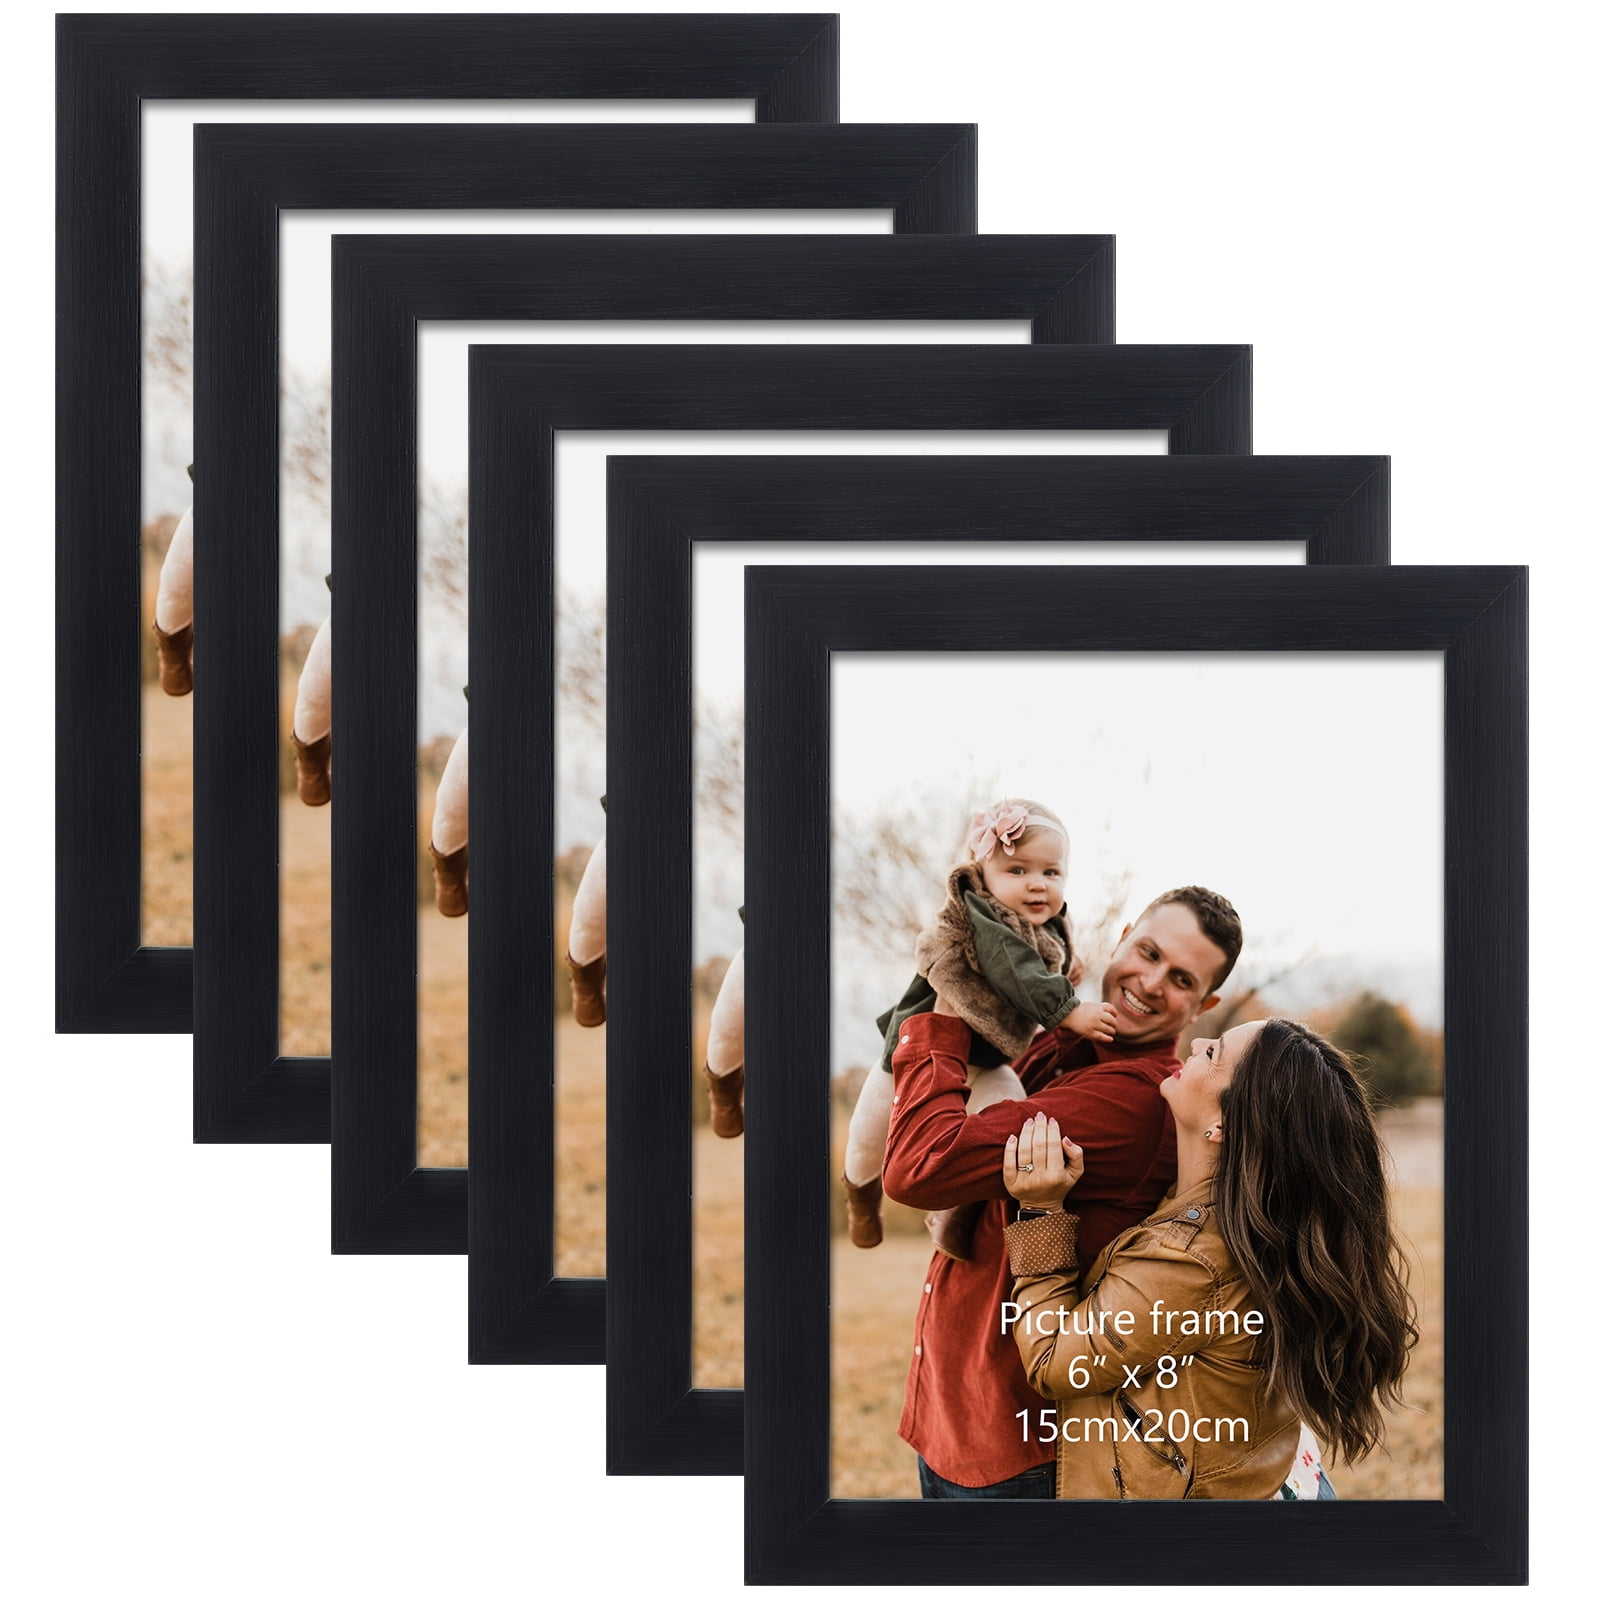 ZYUE 6x8 inch Picture Frame Made of Wood and High Definition Plexi Glass  for Wall Mounting and Table Top Display Photo Frame Black